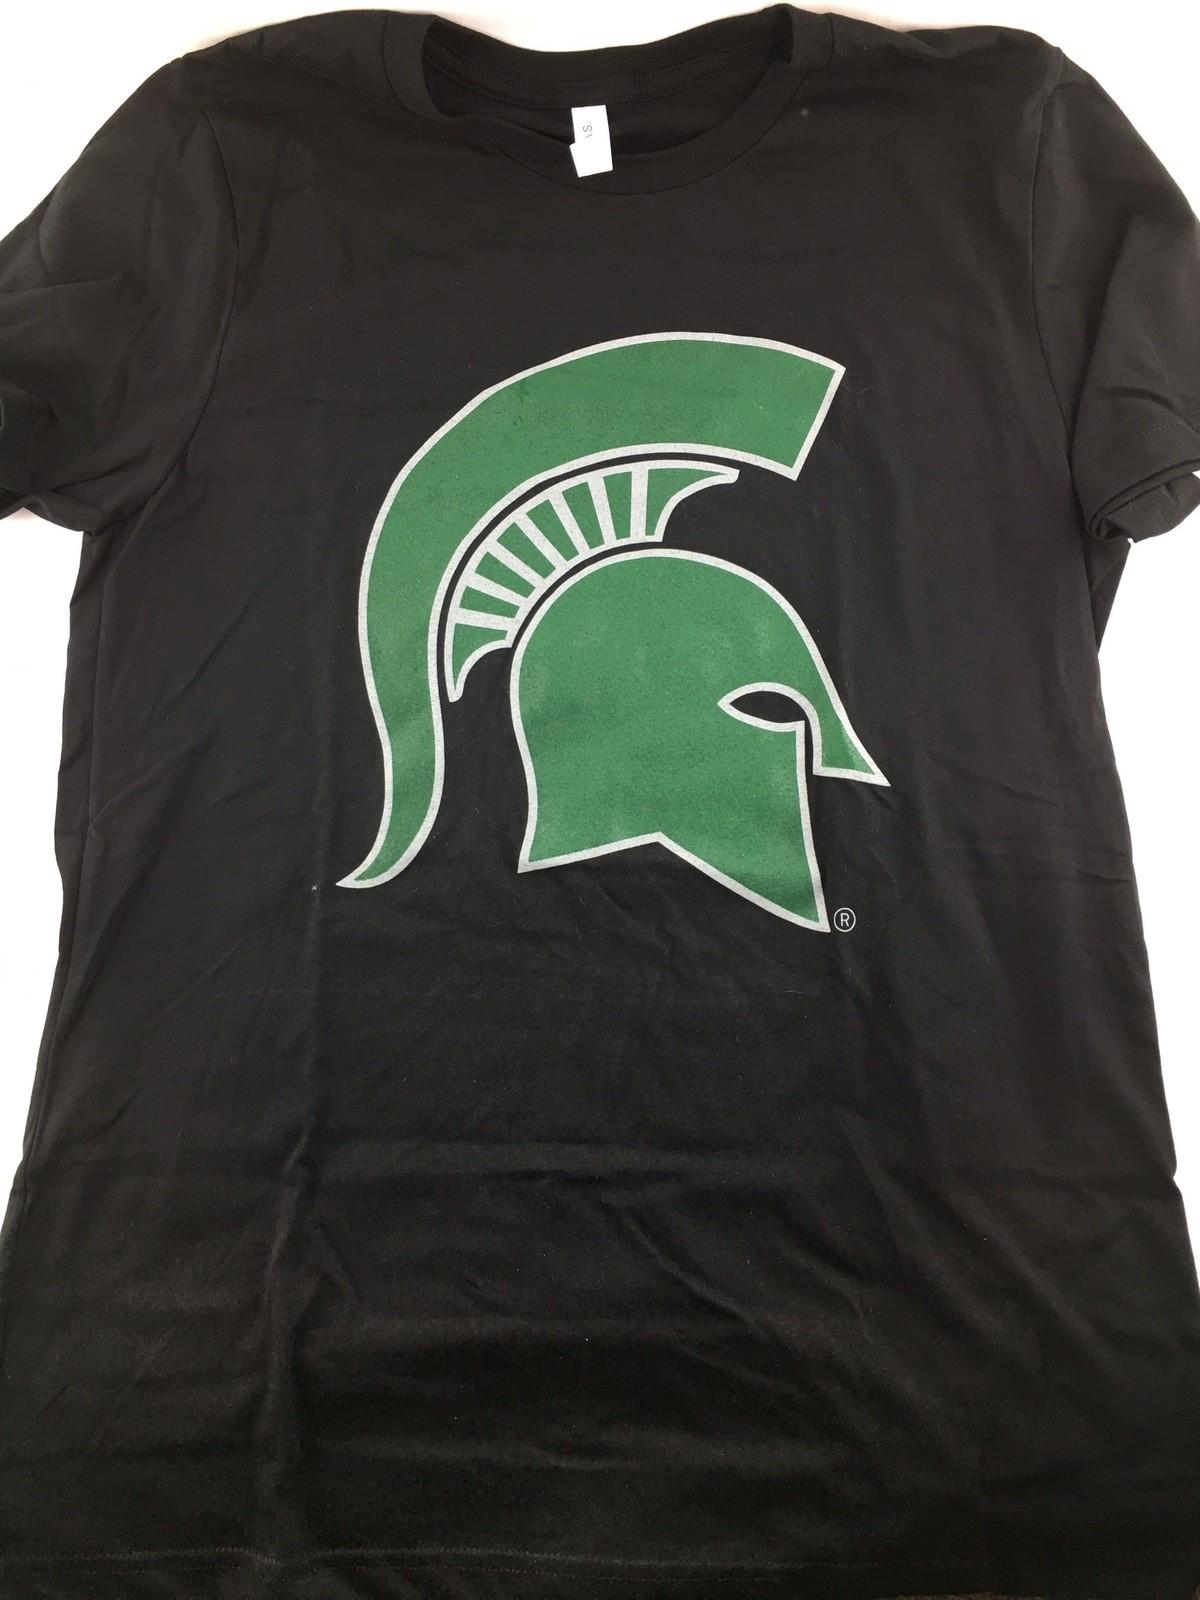 Spartan Box Michigan State Subscription Box Review - October 2017 ...